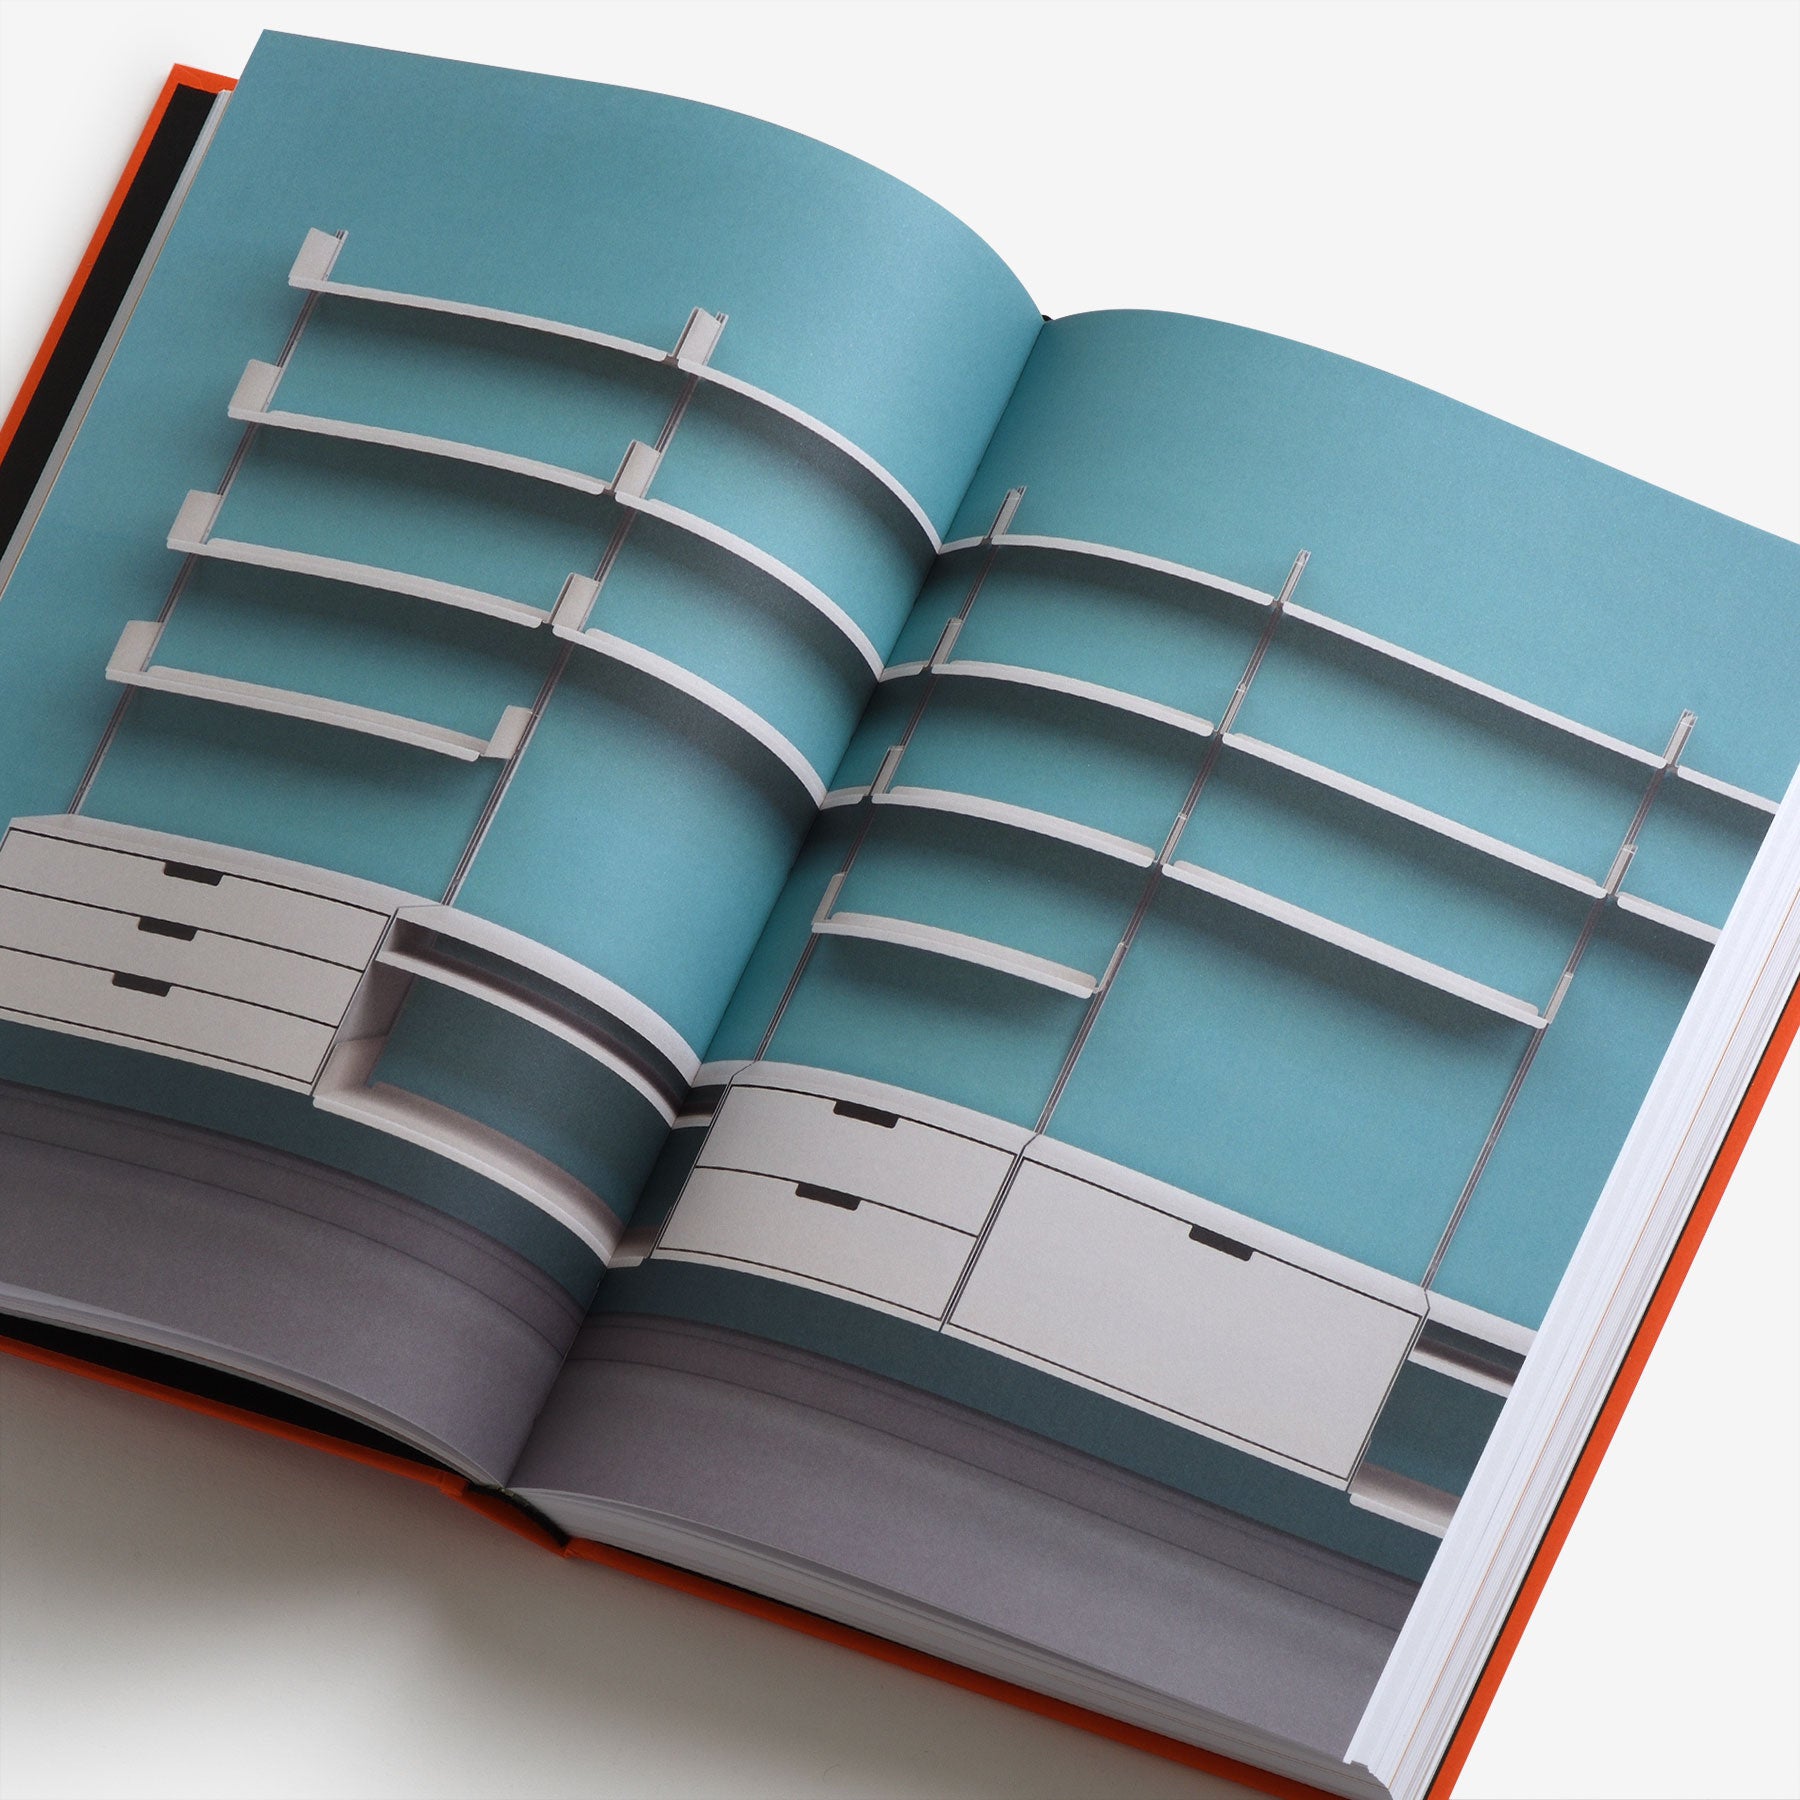 Dieter Rams: The Complete Works | North East